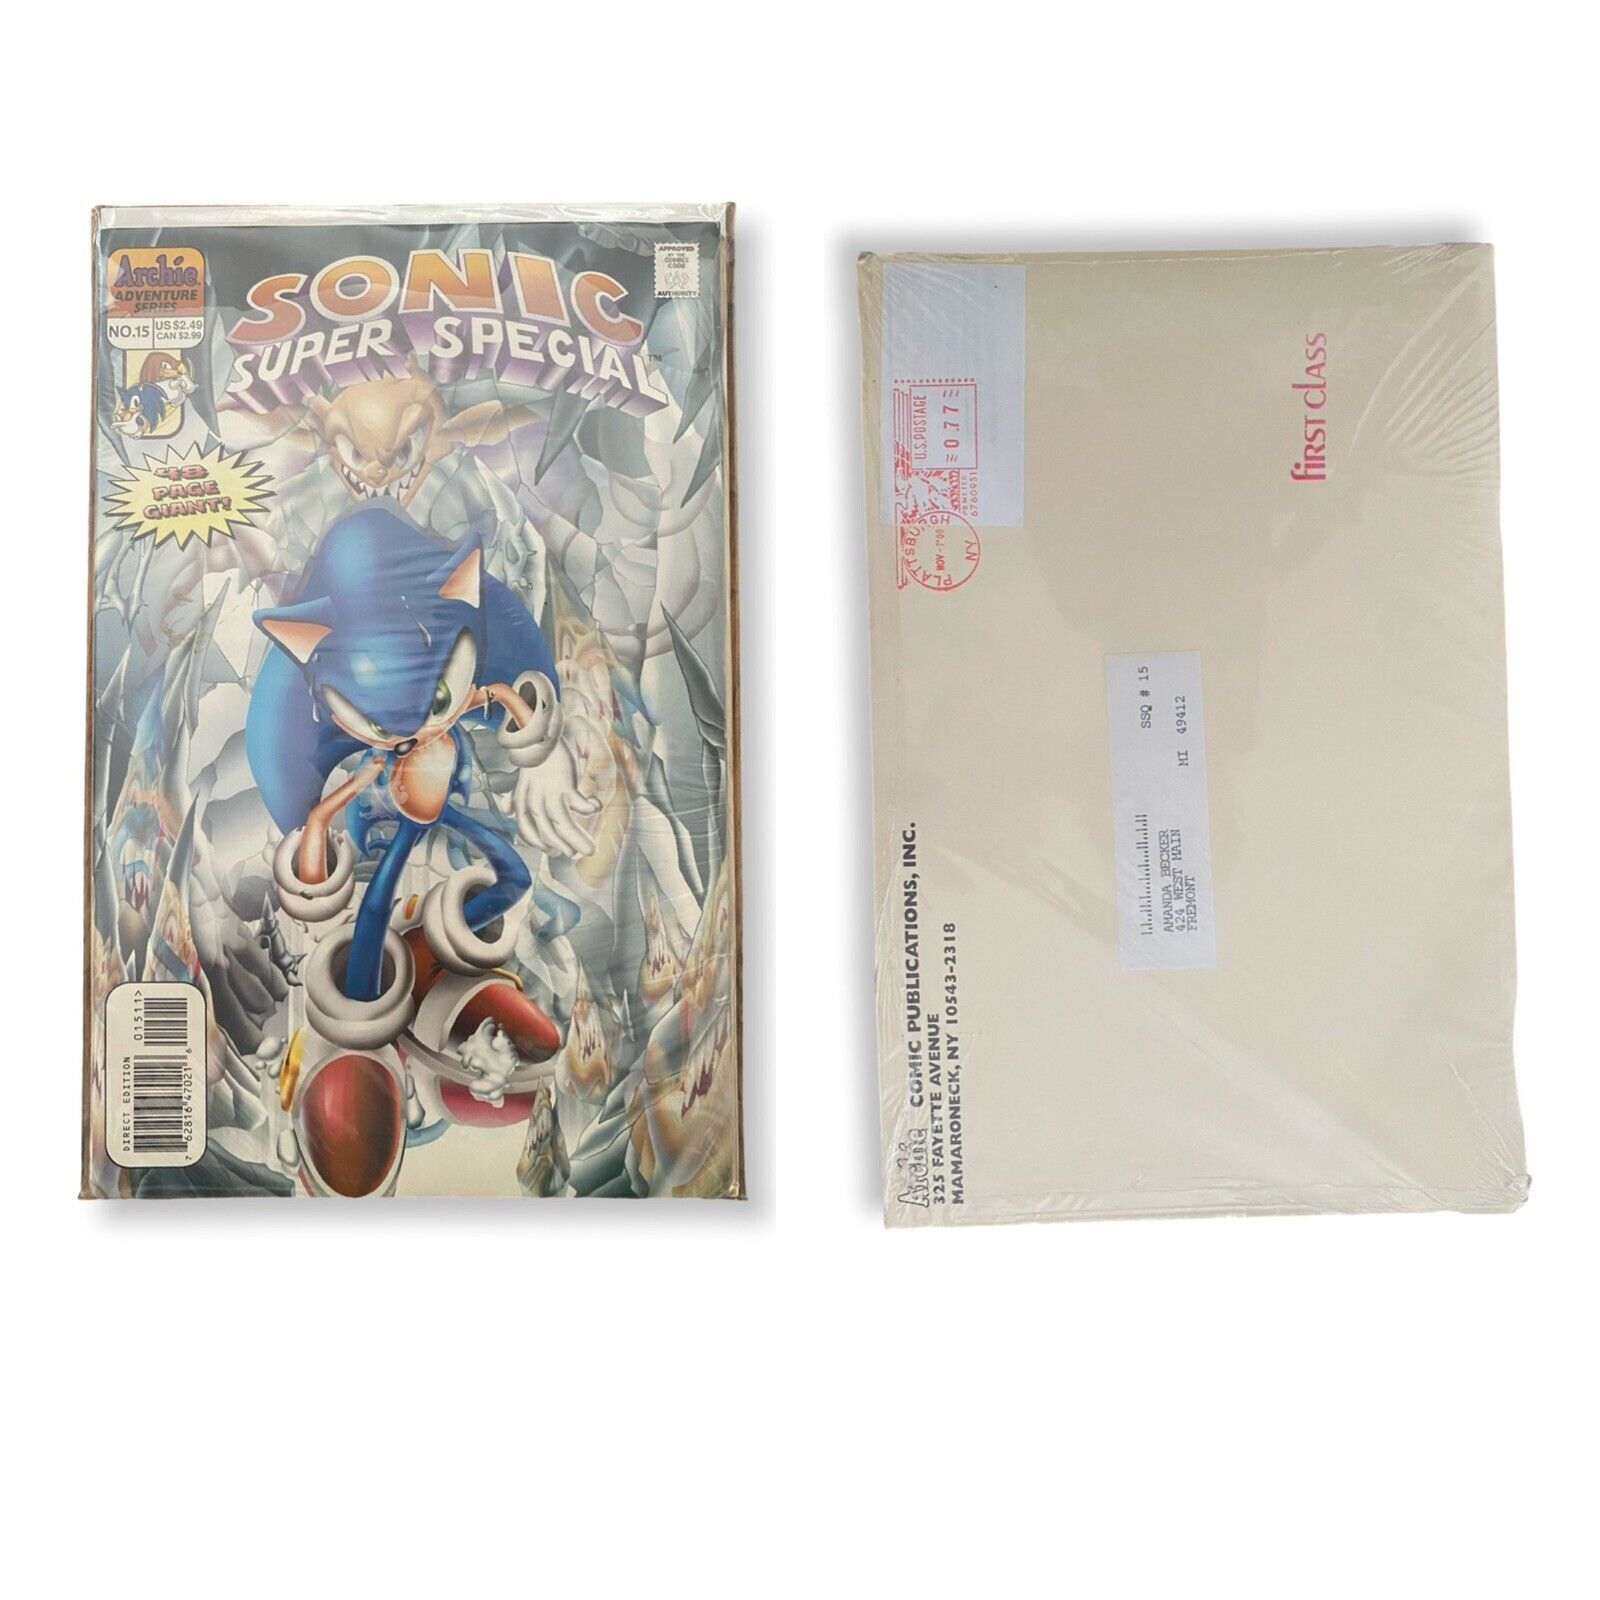 Sonic Super Special #15 2001 Archie Comics - NM+/M Sealed in Subscription Mailer